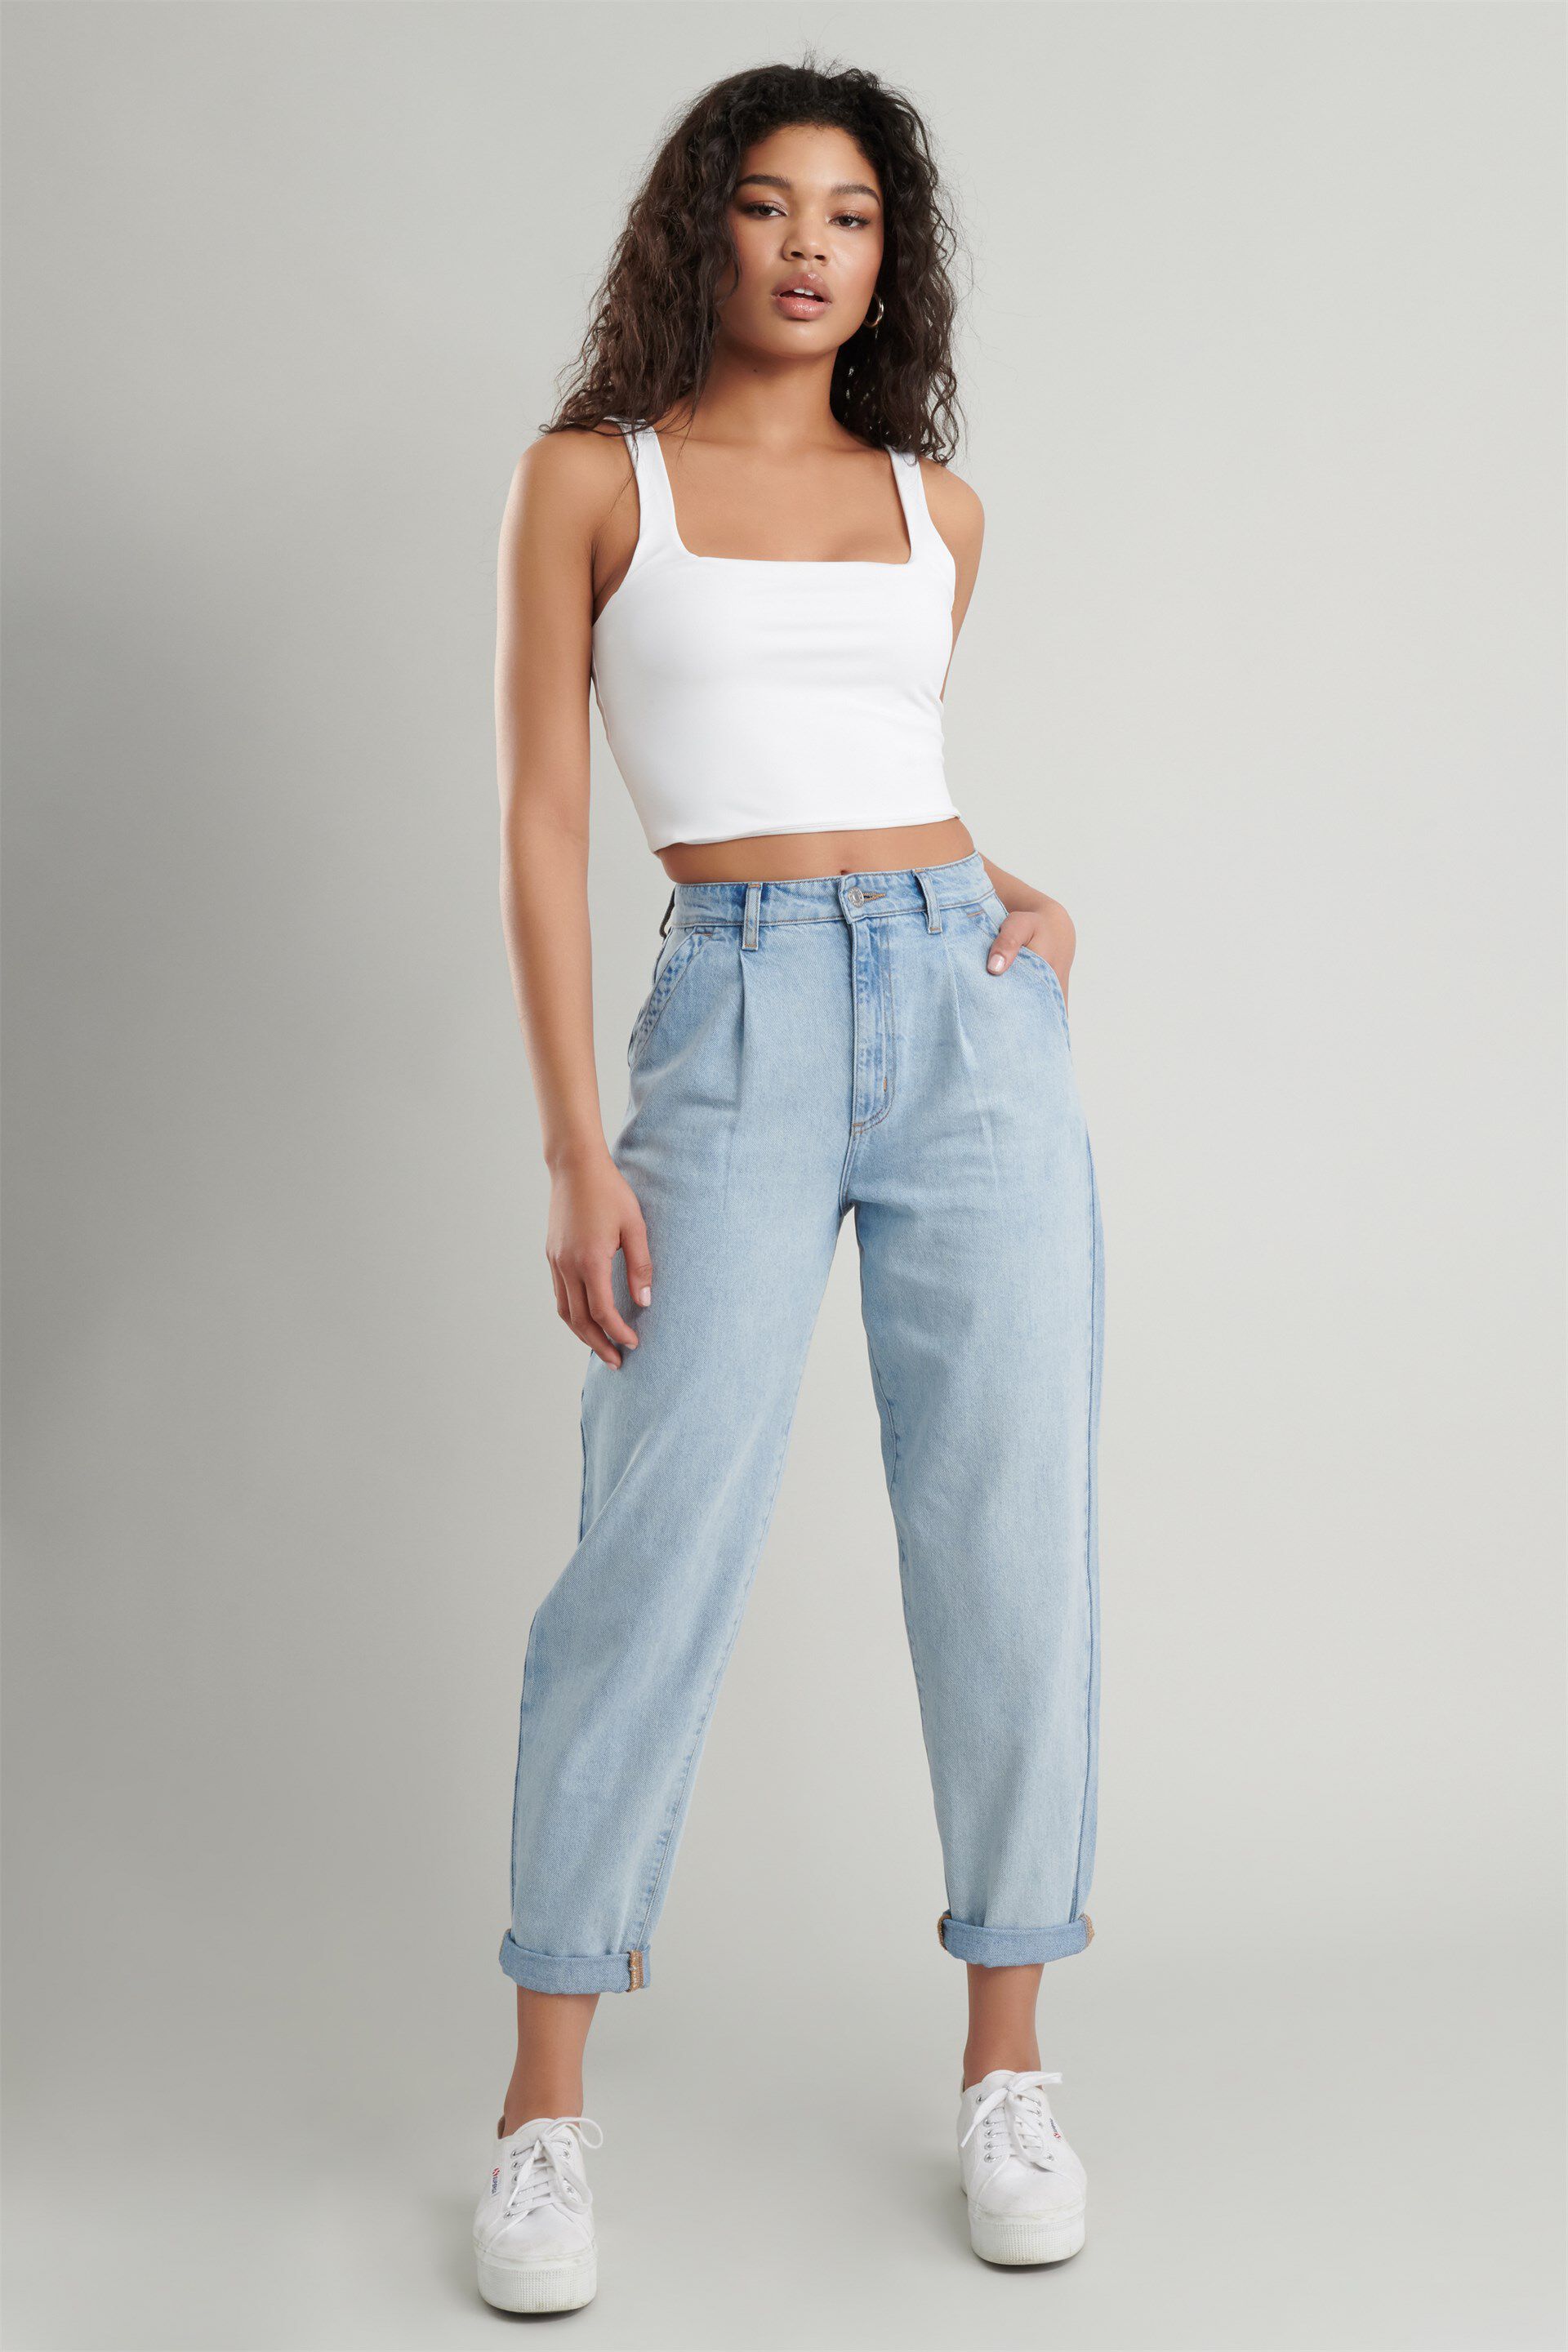 mom jeans 80s style